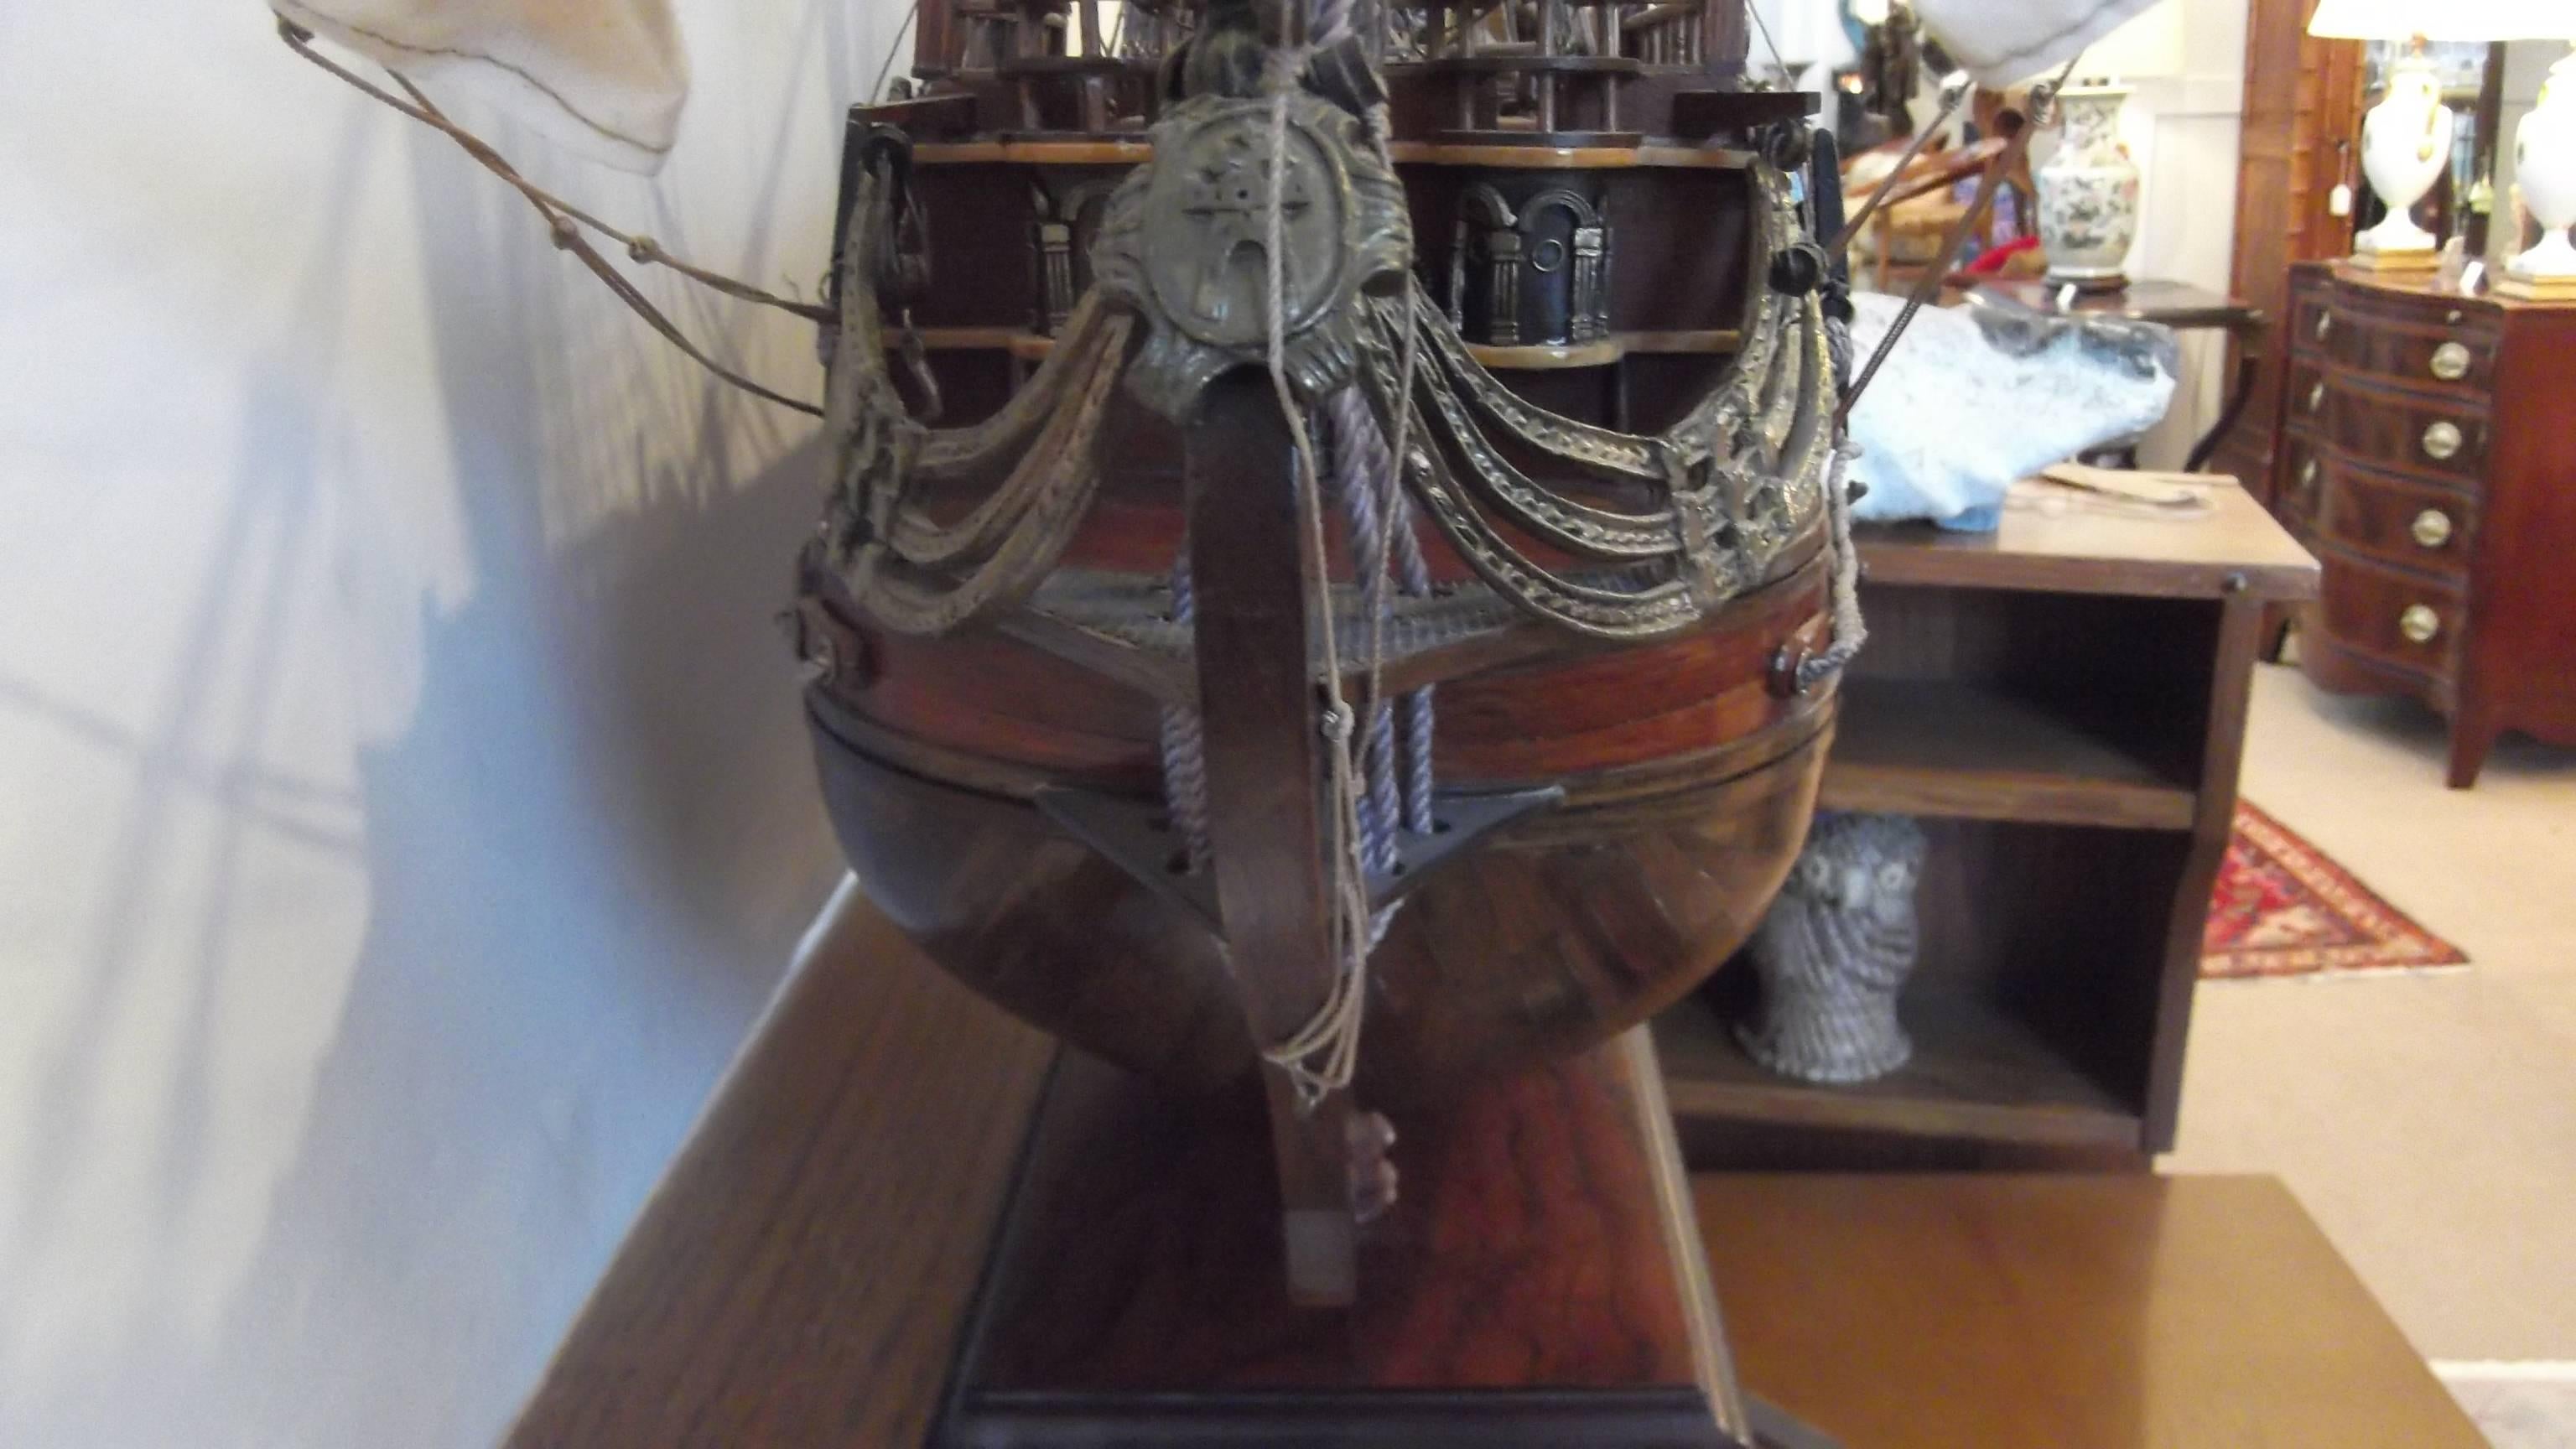 American Intricate Mahogany and Teakwood Large Ship Model of a Spanish Ship